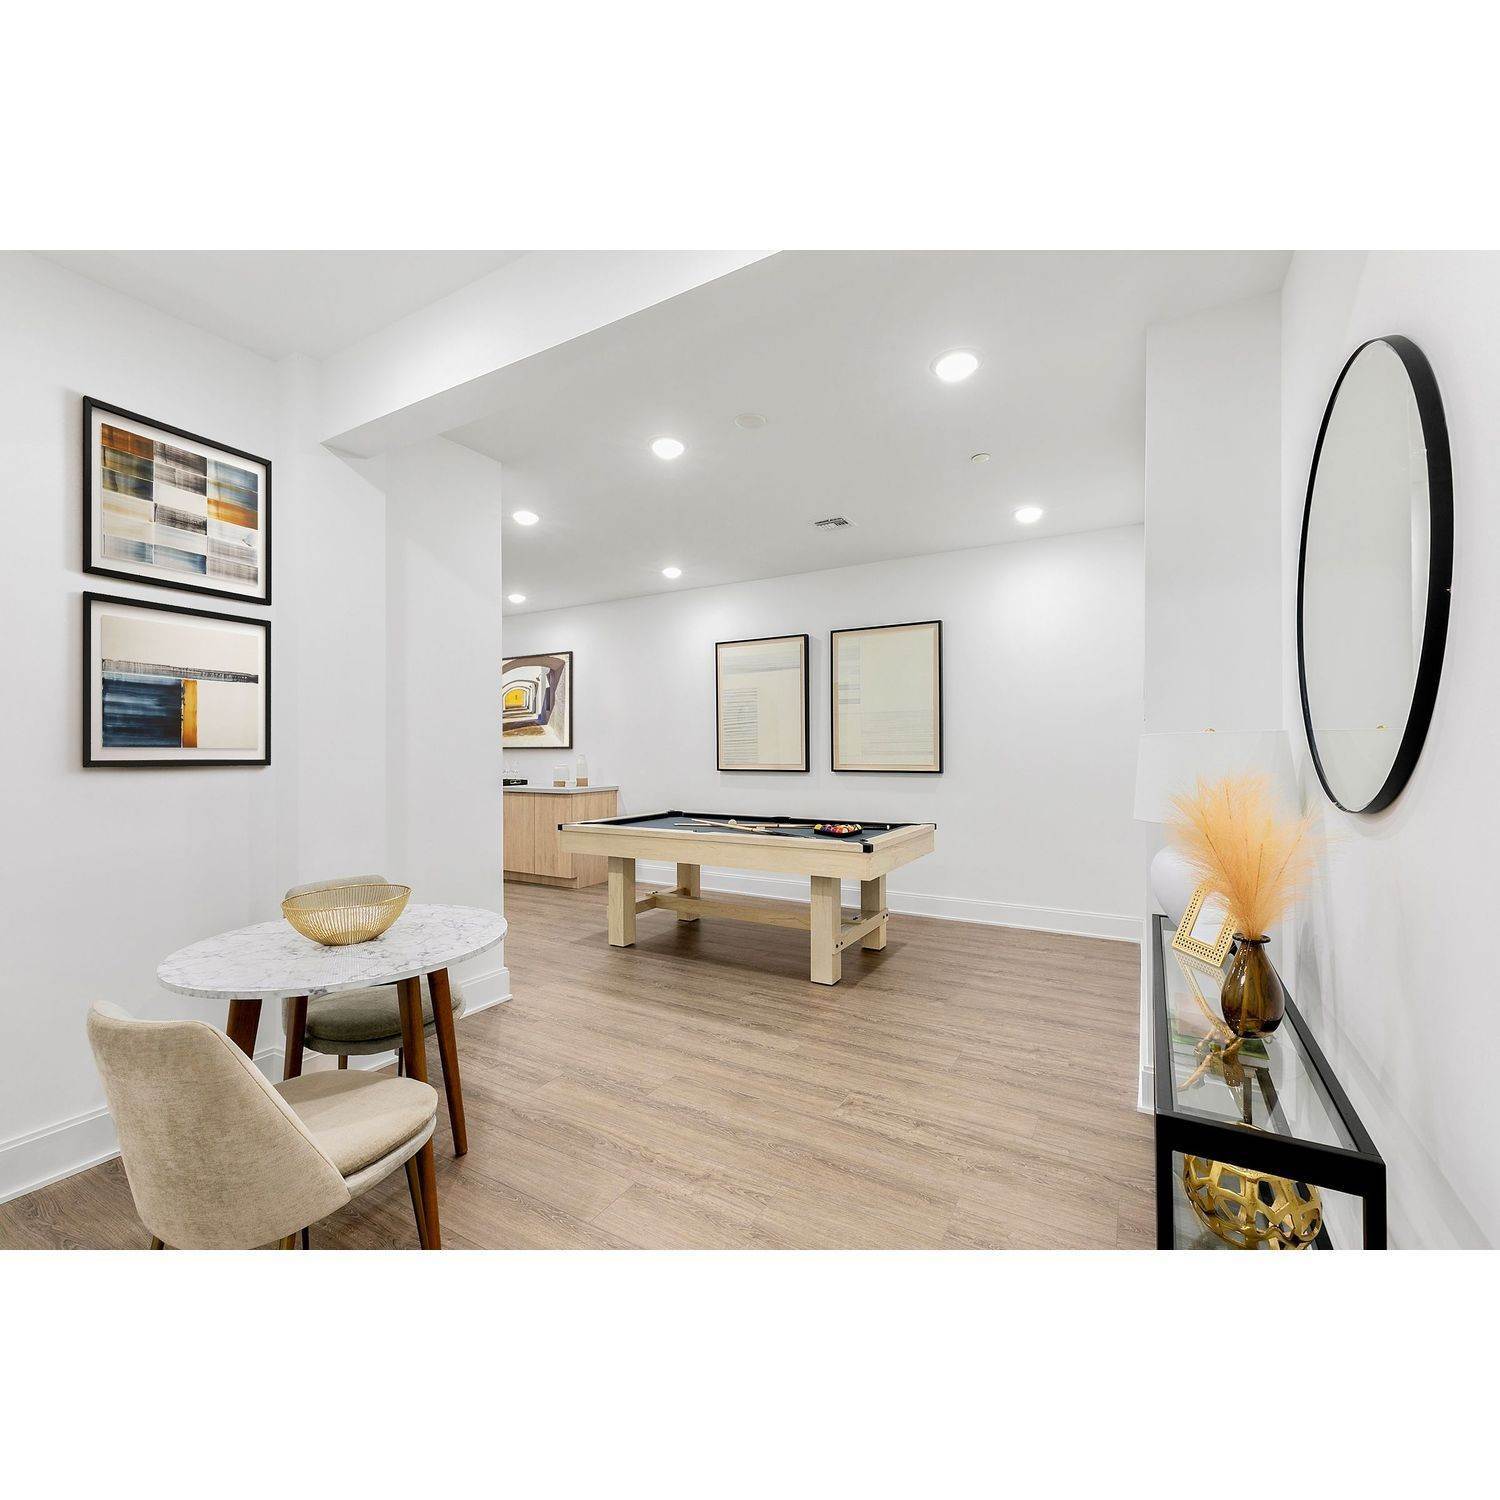 14. Meadowbrook Pointe East Meadow xây dựng tại 123 Merrick Avenue, East Meadow, NY 11554